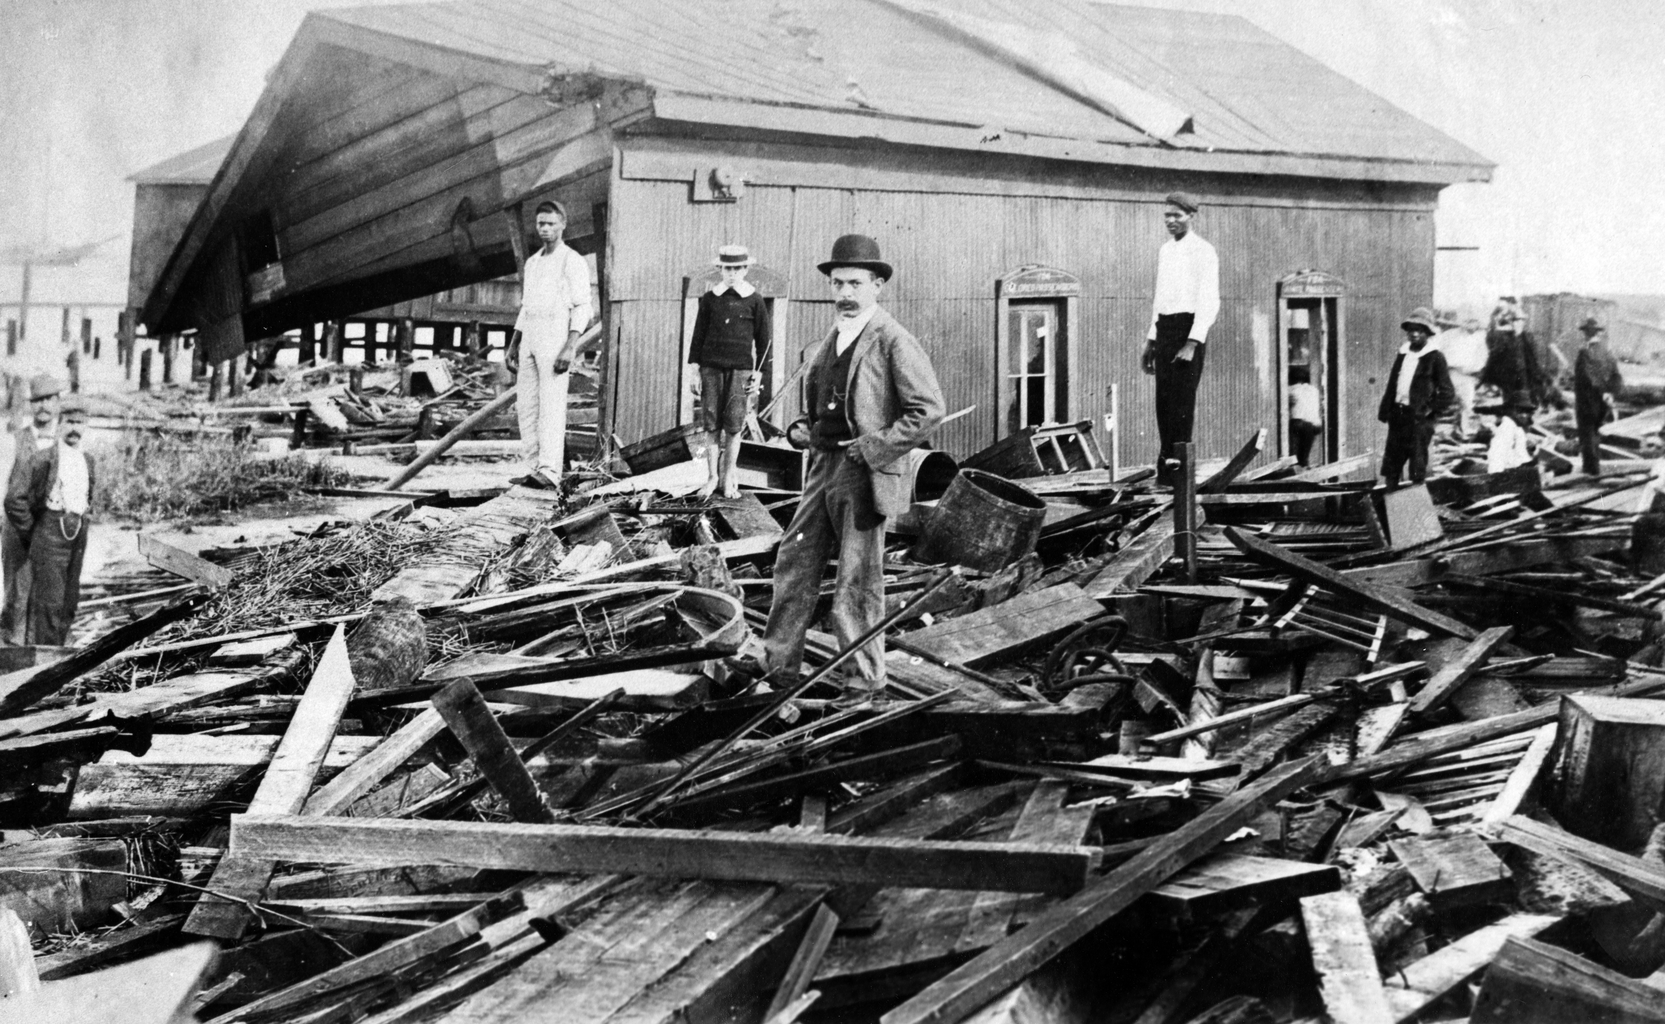 Lessons from hurricanes past